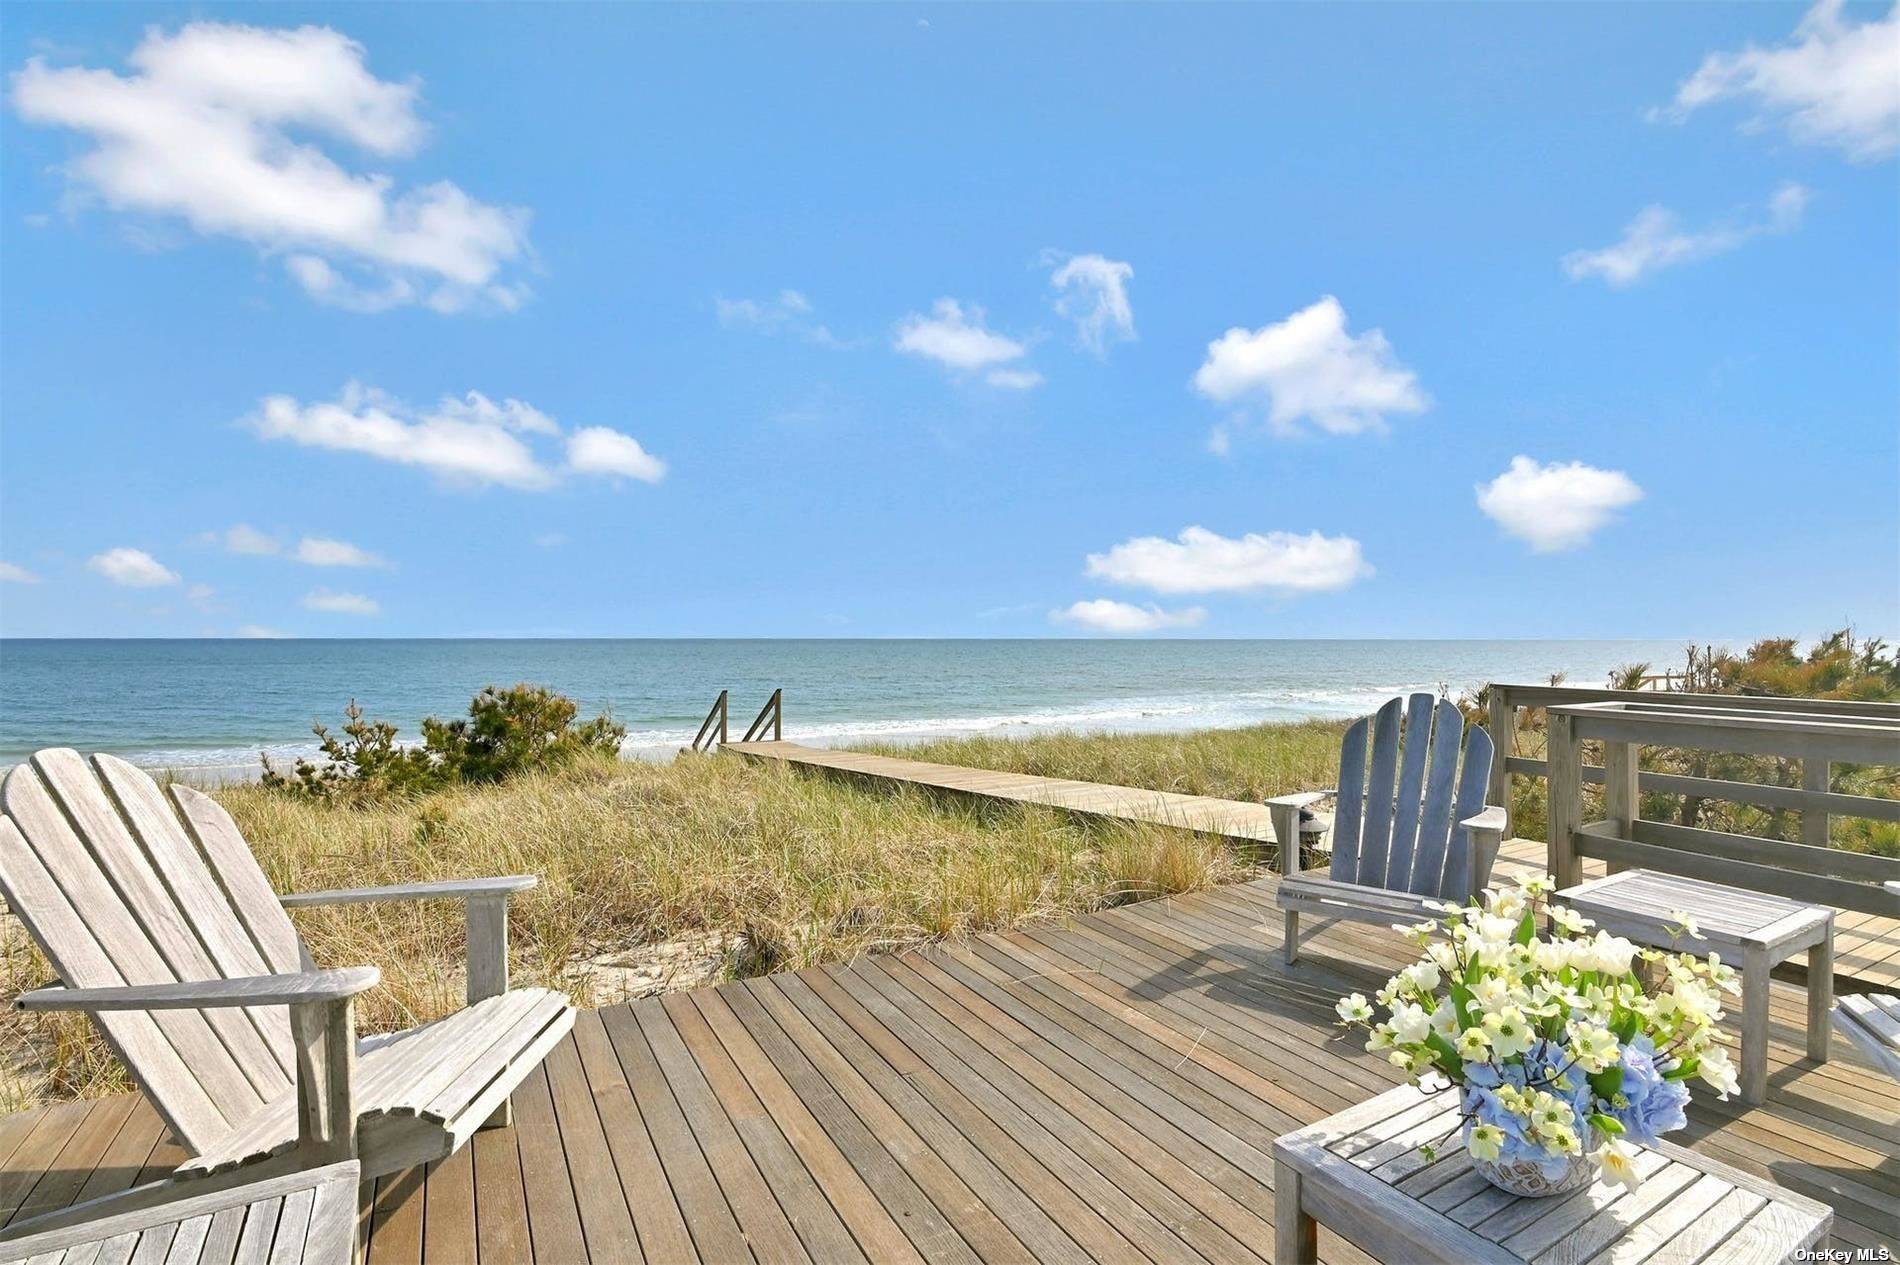 Live in laid back luxury in this oceanfront home in Quogue, one of the most desirable areas of the world famous Hamptons.